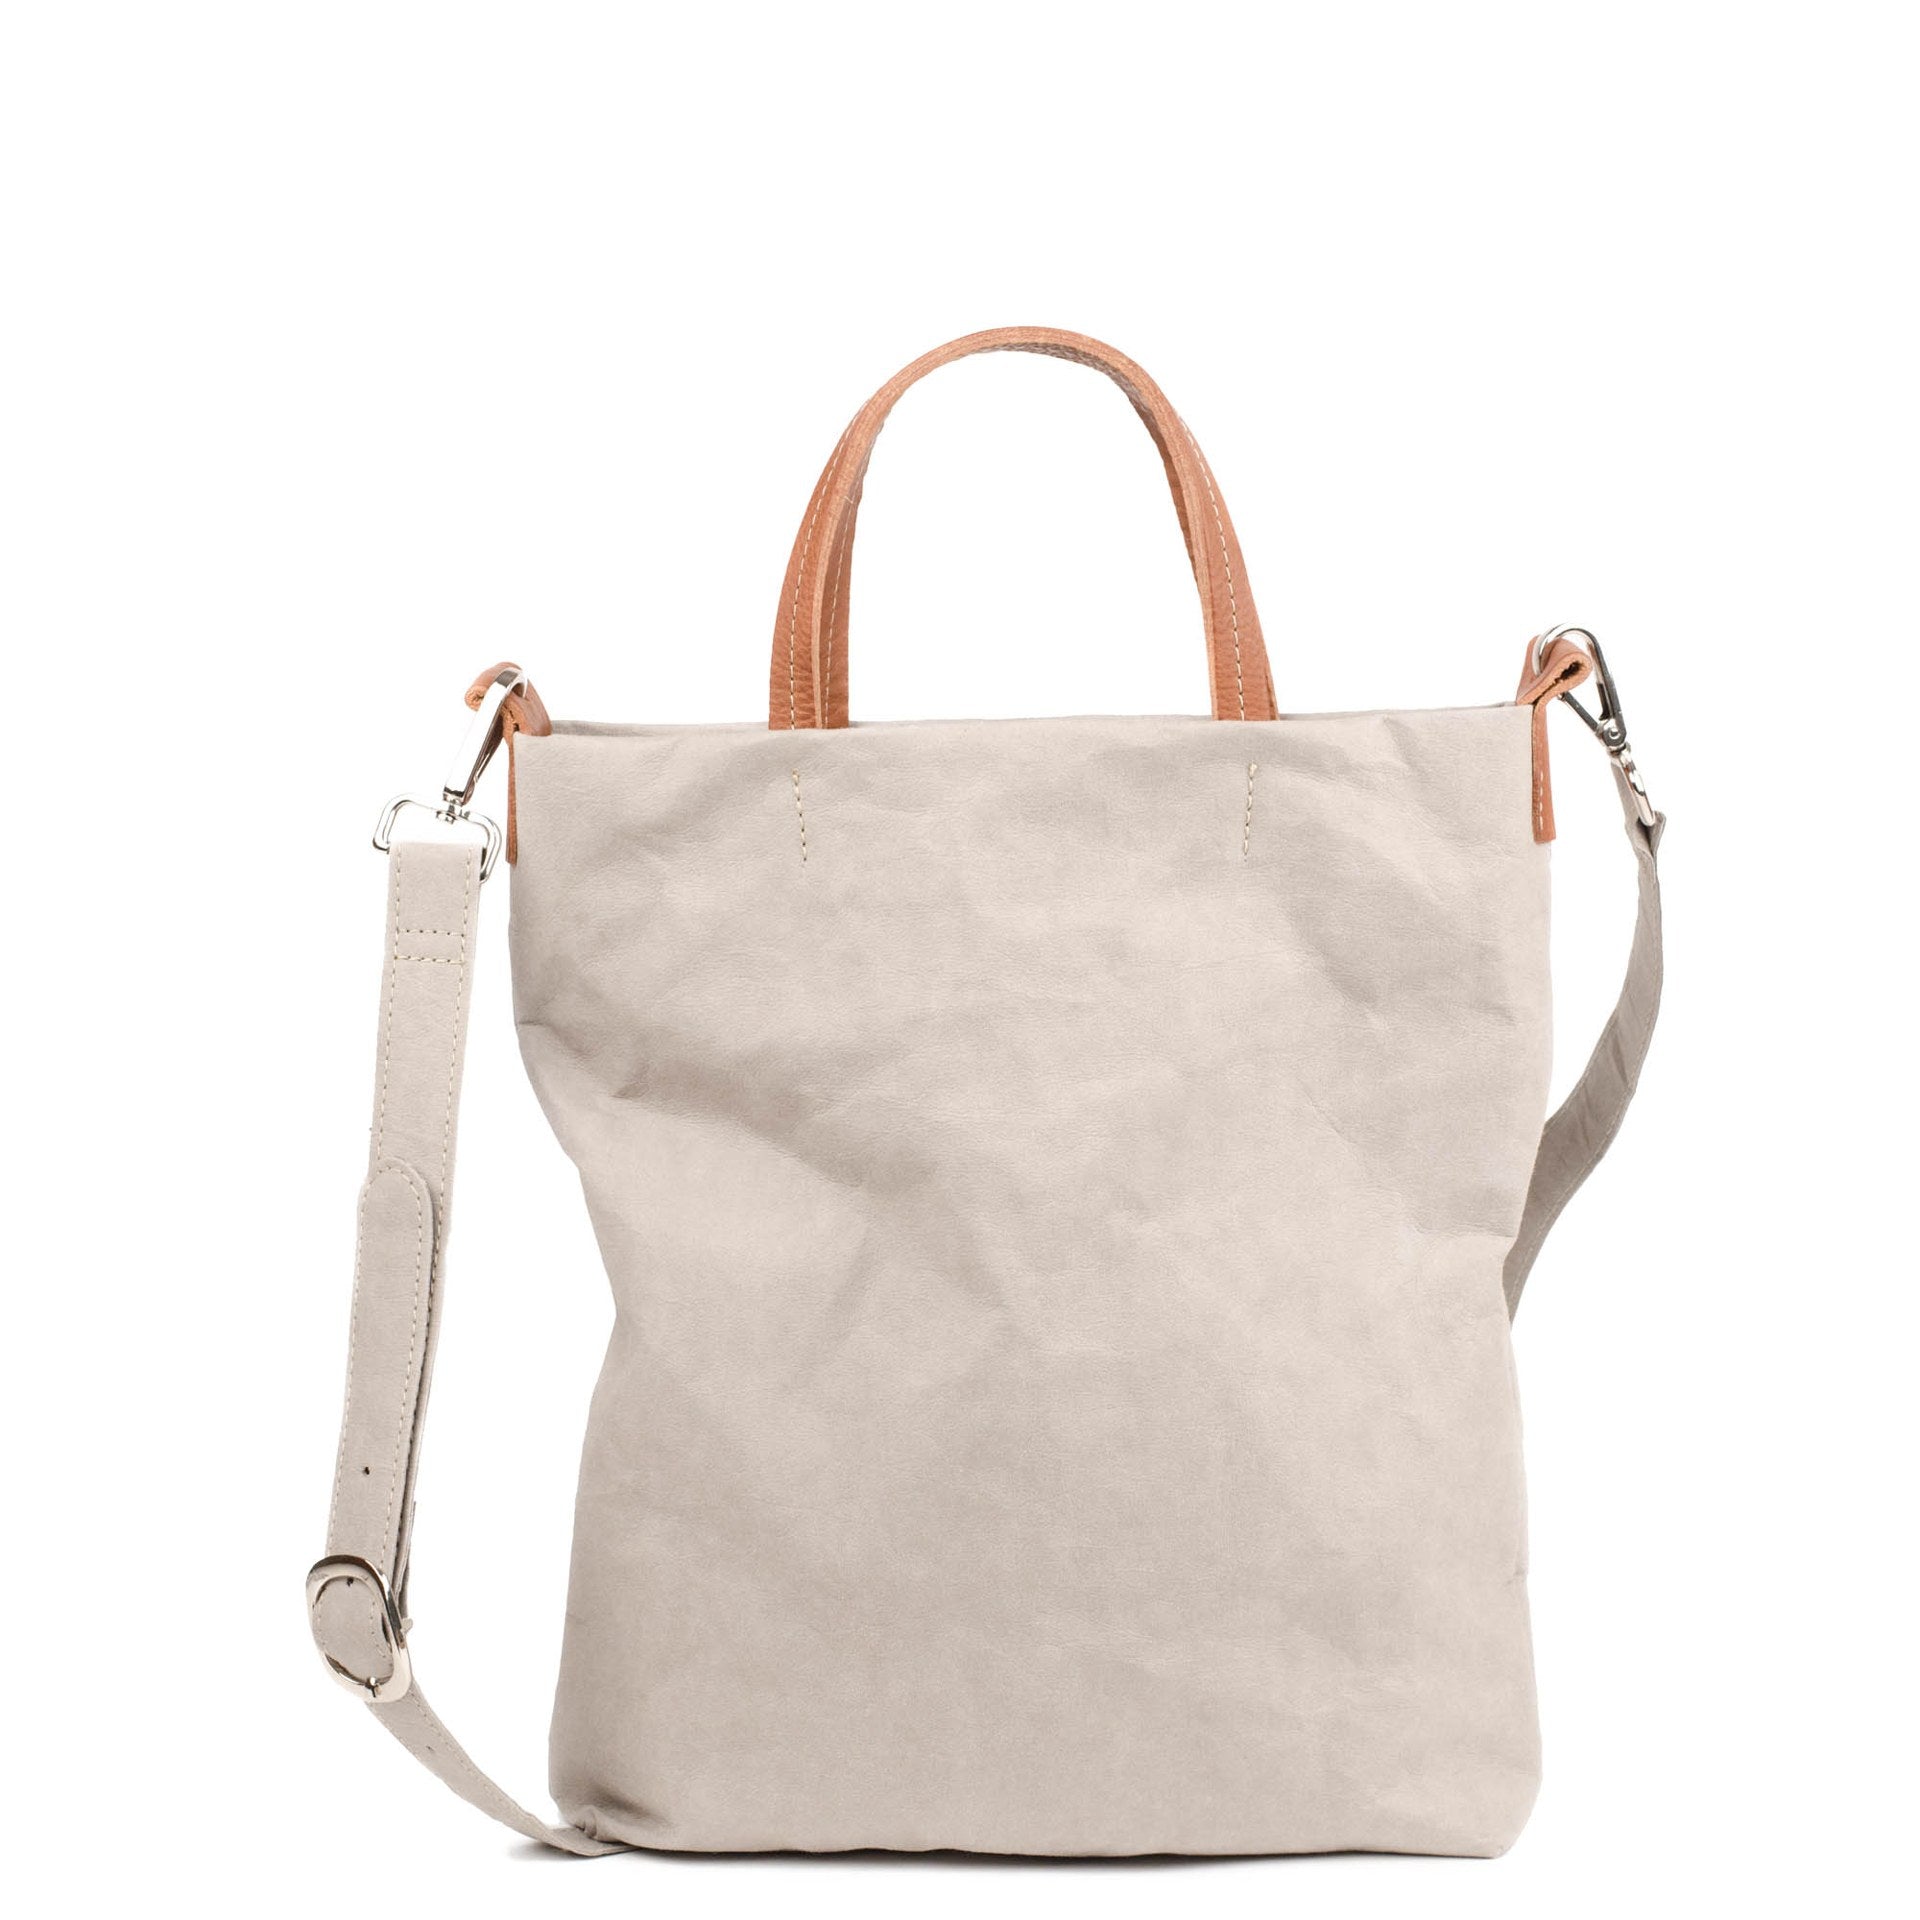 A washable paper tote bag is shown from the front angle. It has a relaxed shape, two top handles and a long shoulder strap. It is pale grey in colour.